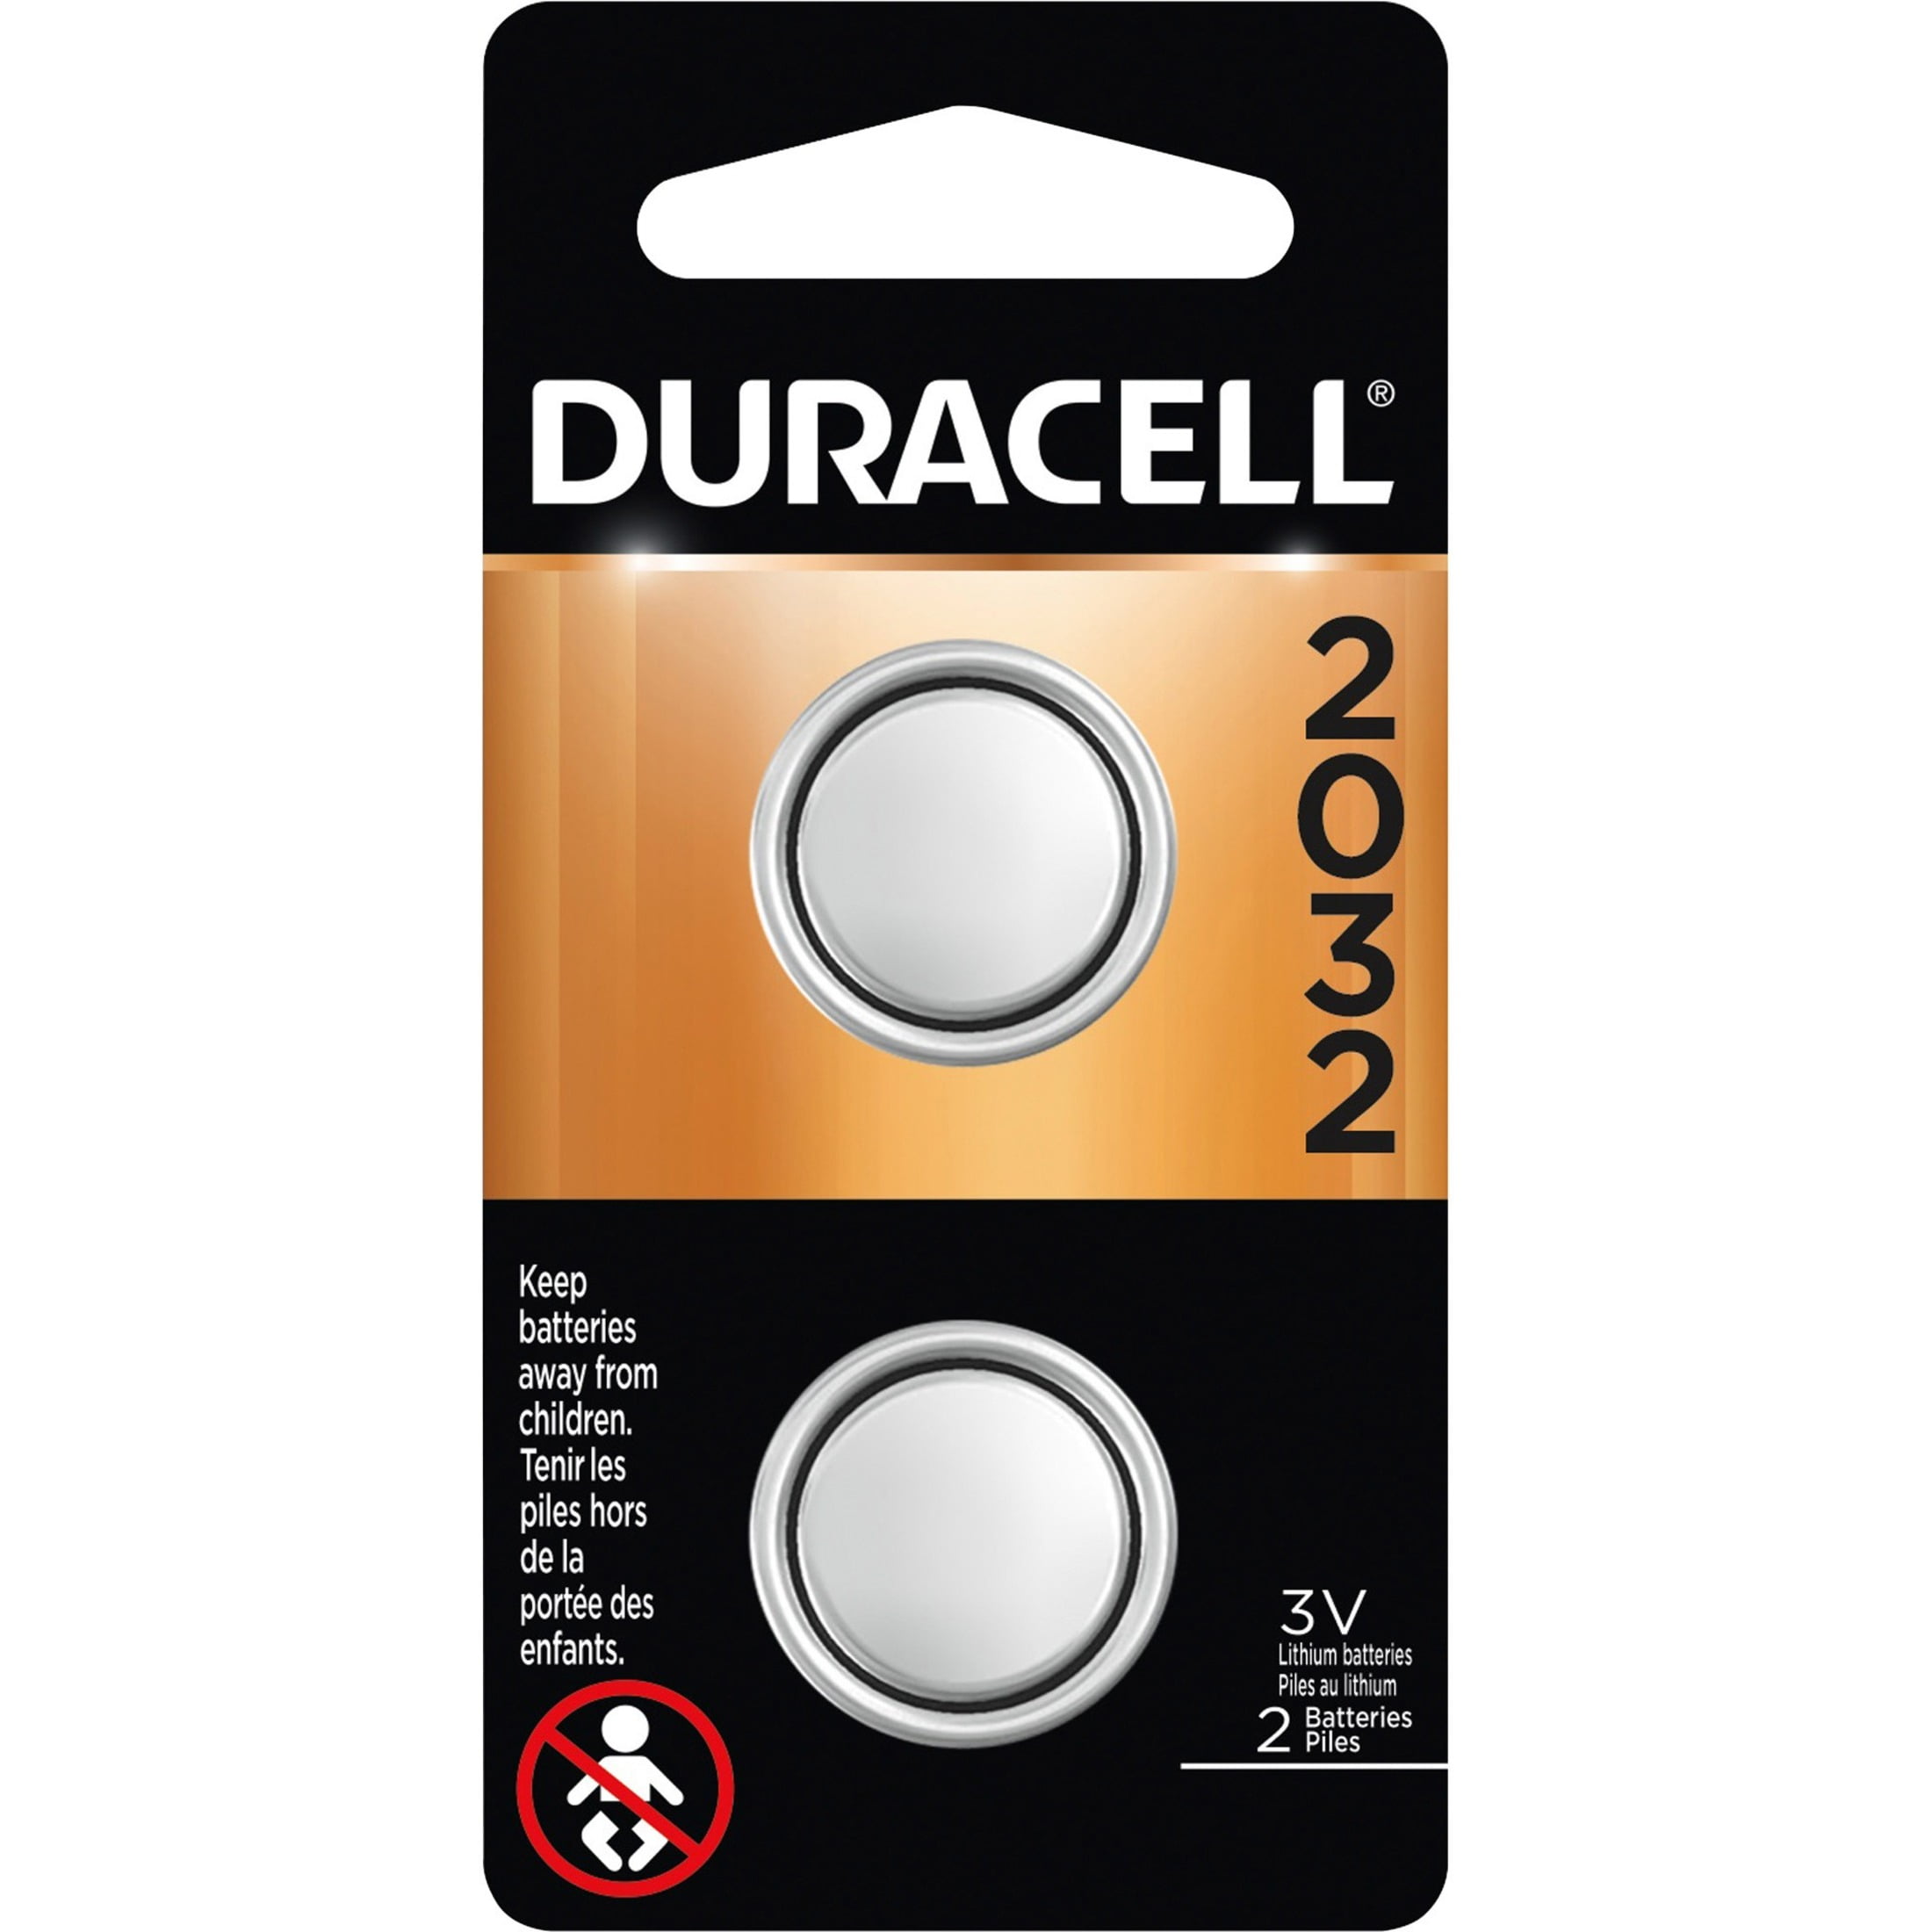 Duracell CR1620 pile bouton lithium